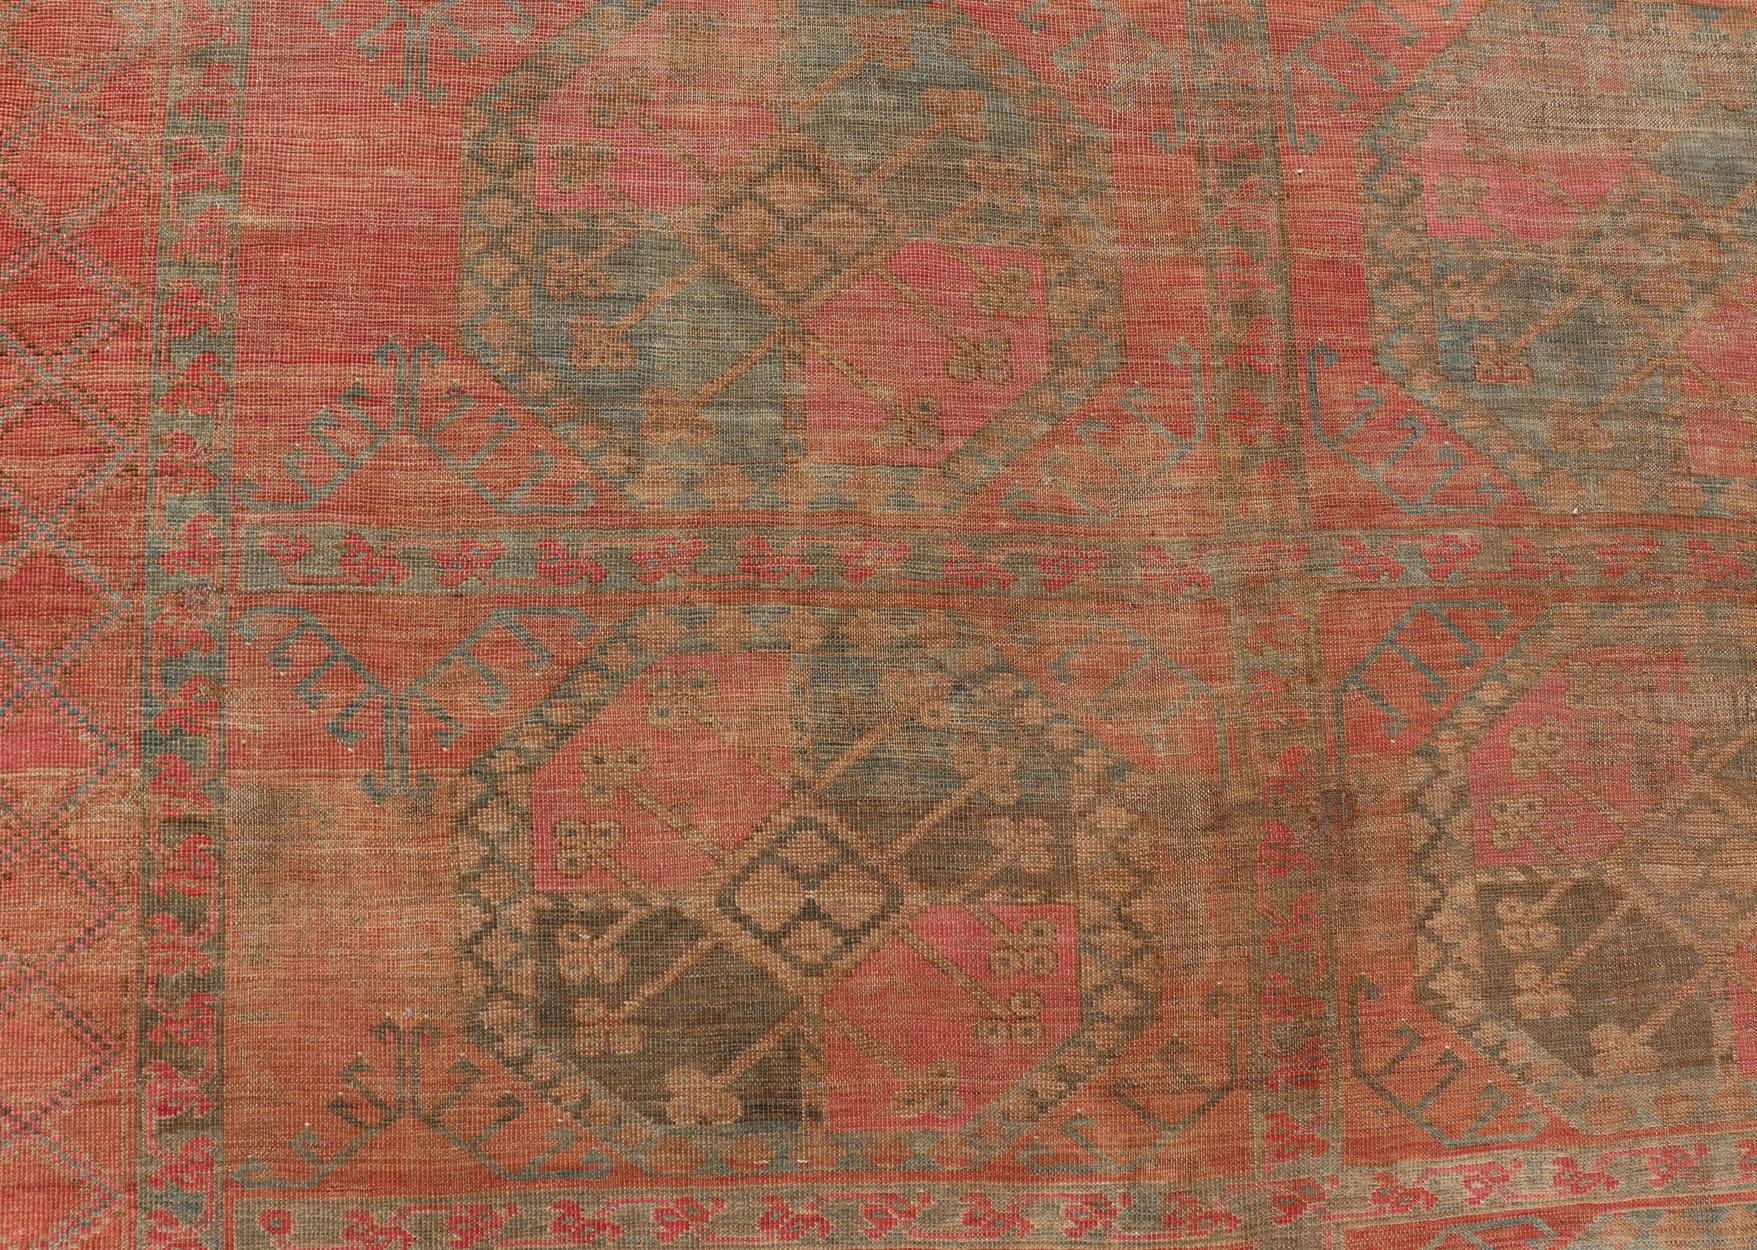 20th Century Large Turkomen Ersari Rug with All-Over Gul Design in Tan, Coral, and Brown For Sale